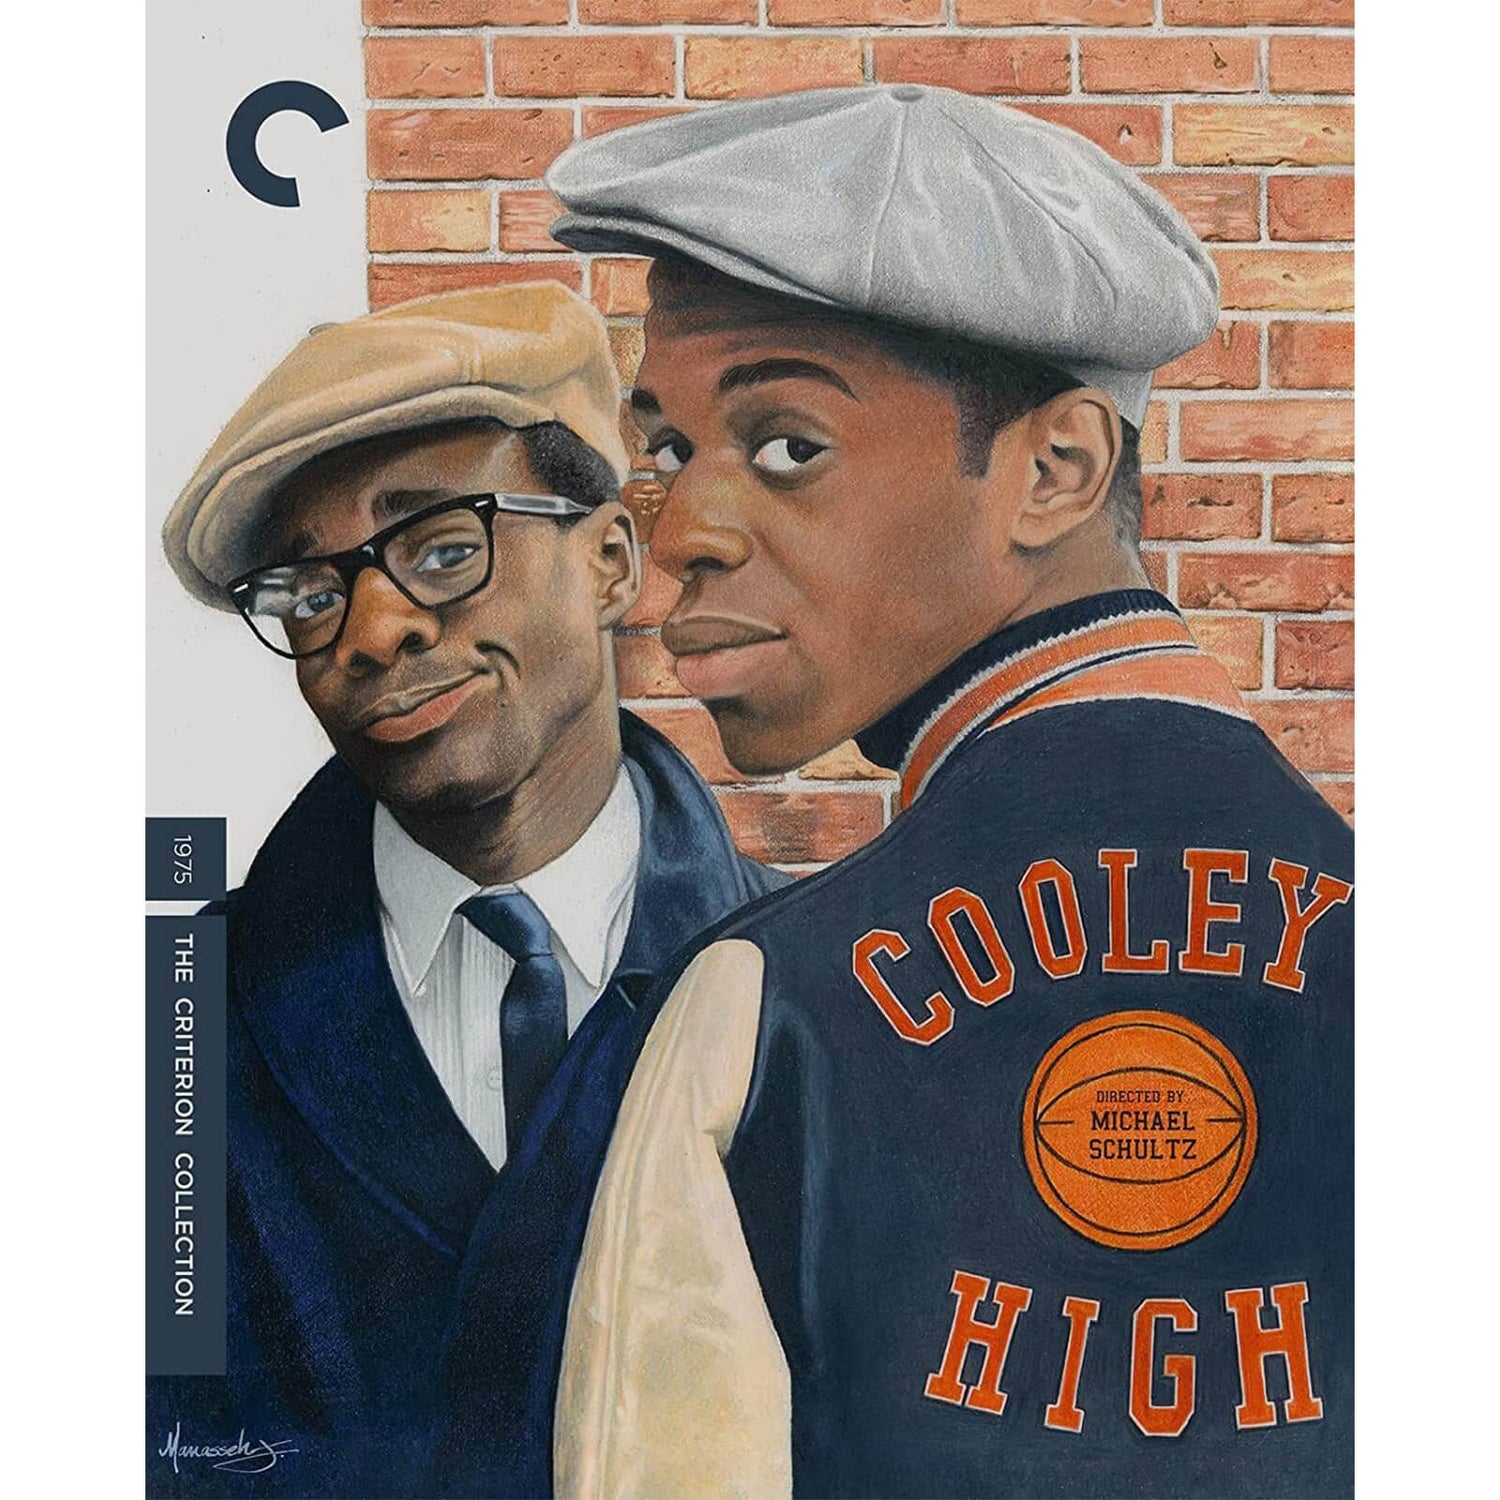 Cooley High - The Criterion Collection